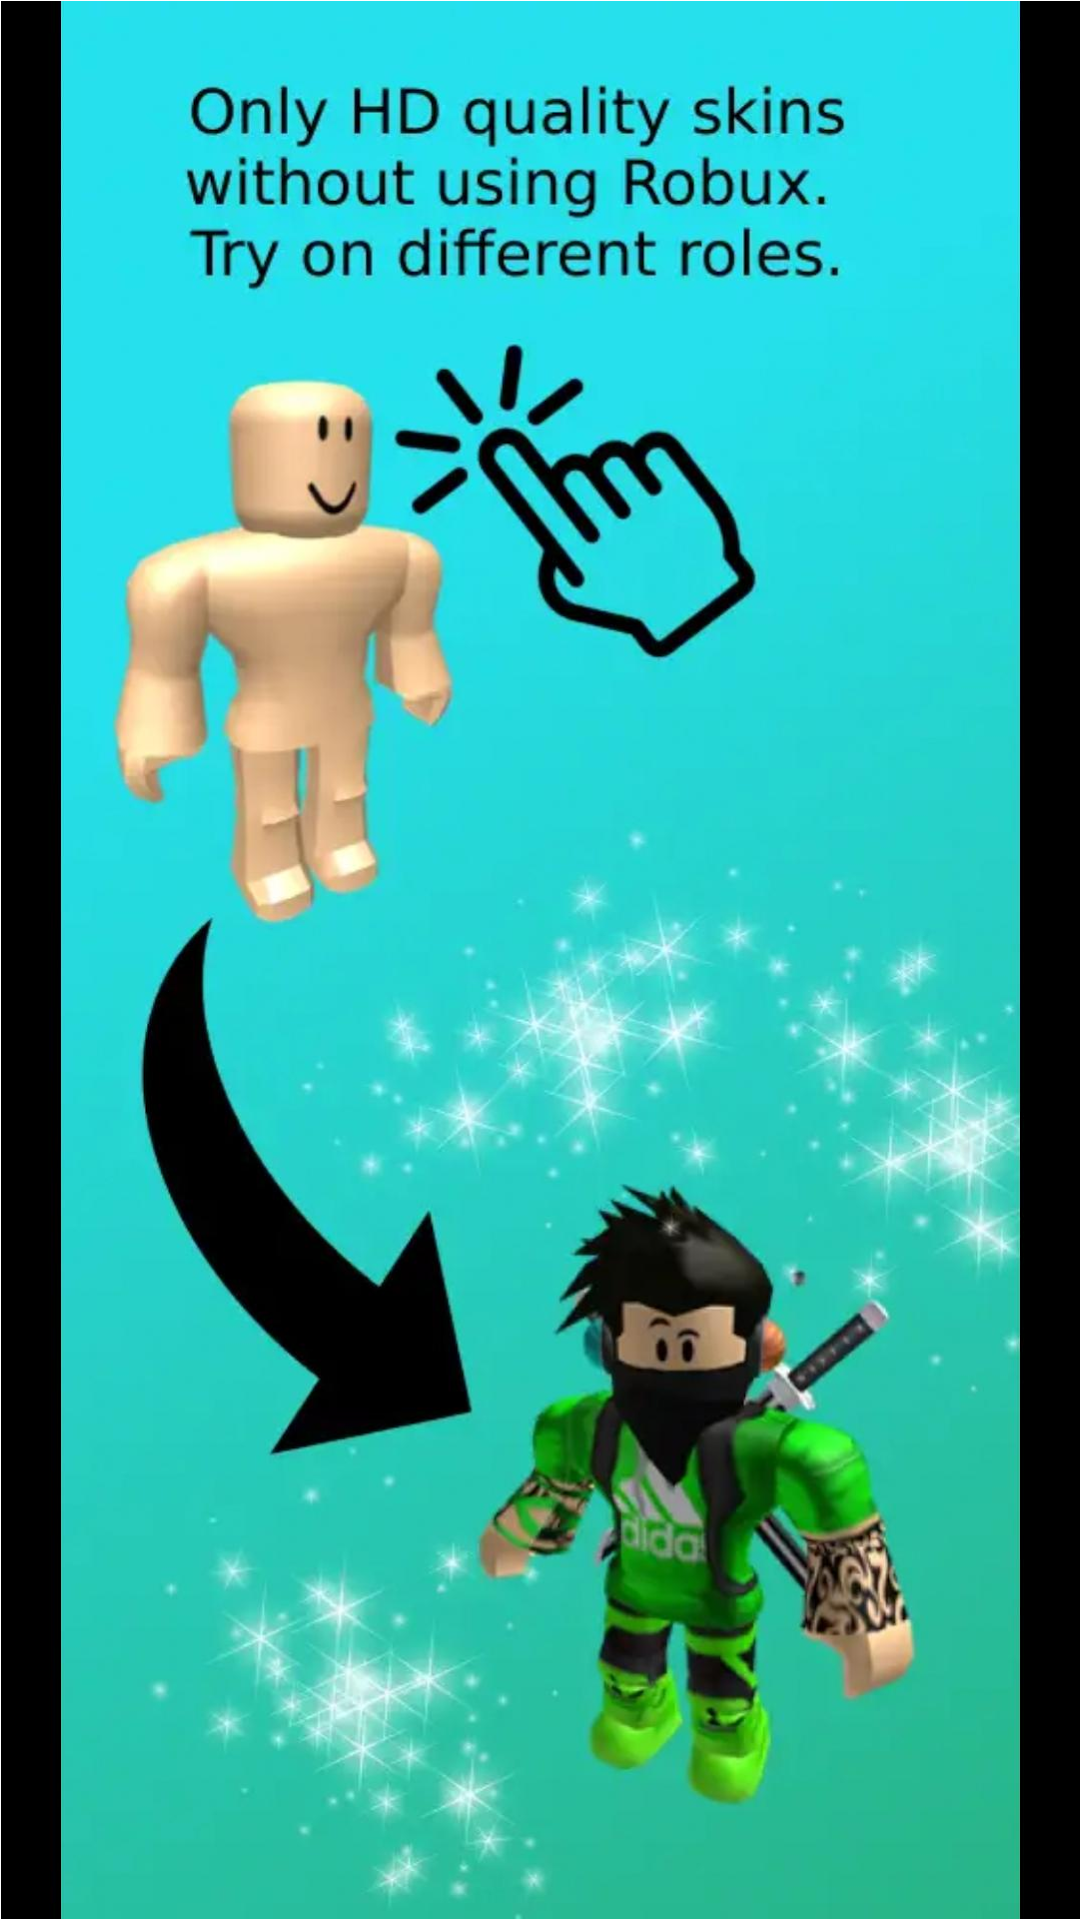 Download do APK de Skins For Roblox : Free Robux para Android